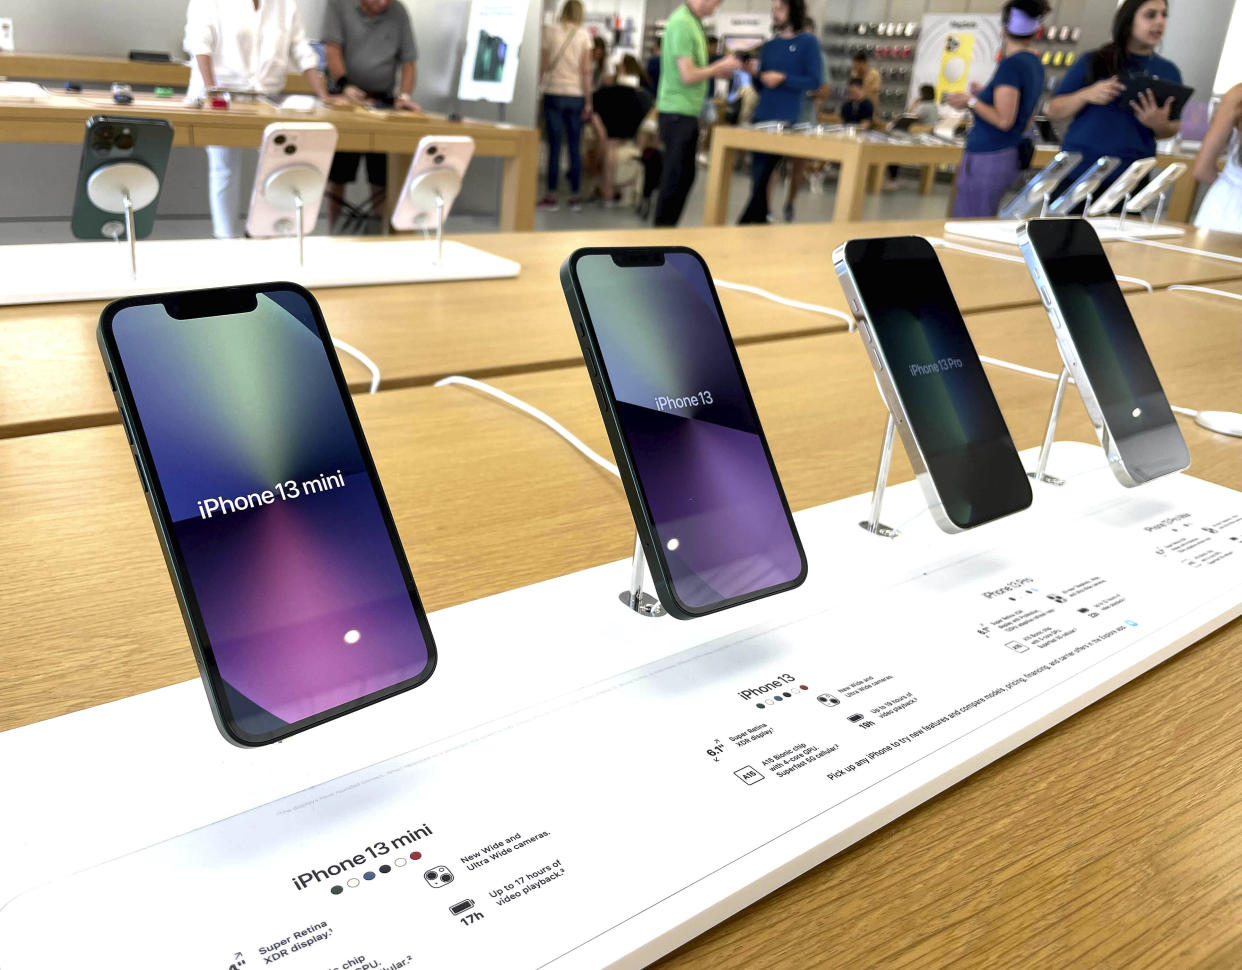 Photo by: STRF/STAR MAX/IPx 2022 7/30/22 Atmosphere at an Apple Store in Greenwich, Connecticut. Here iphone 13's are seen on display.